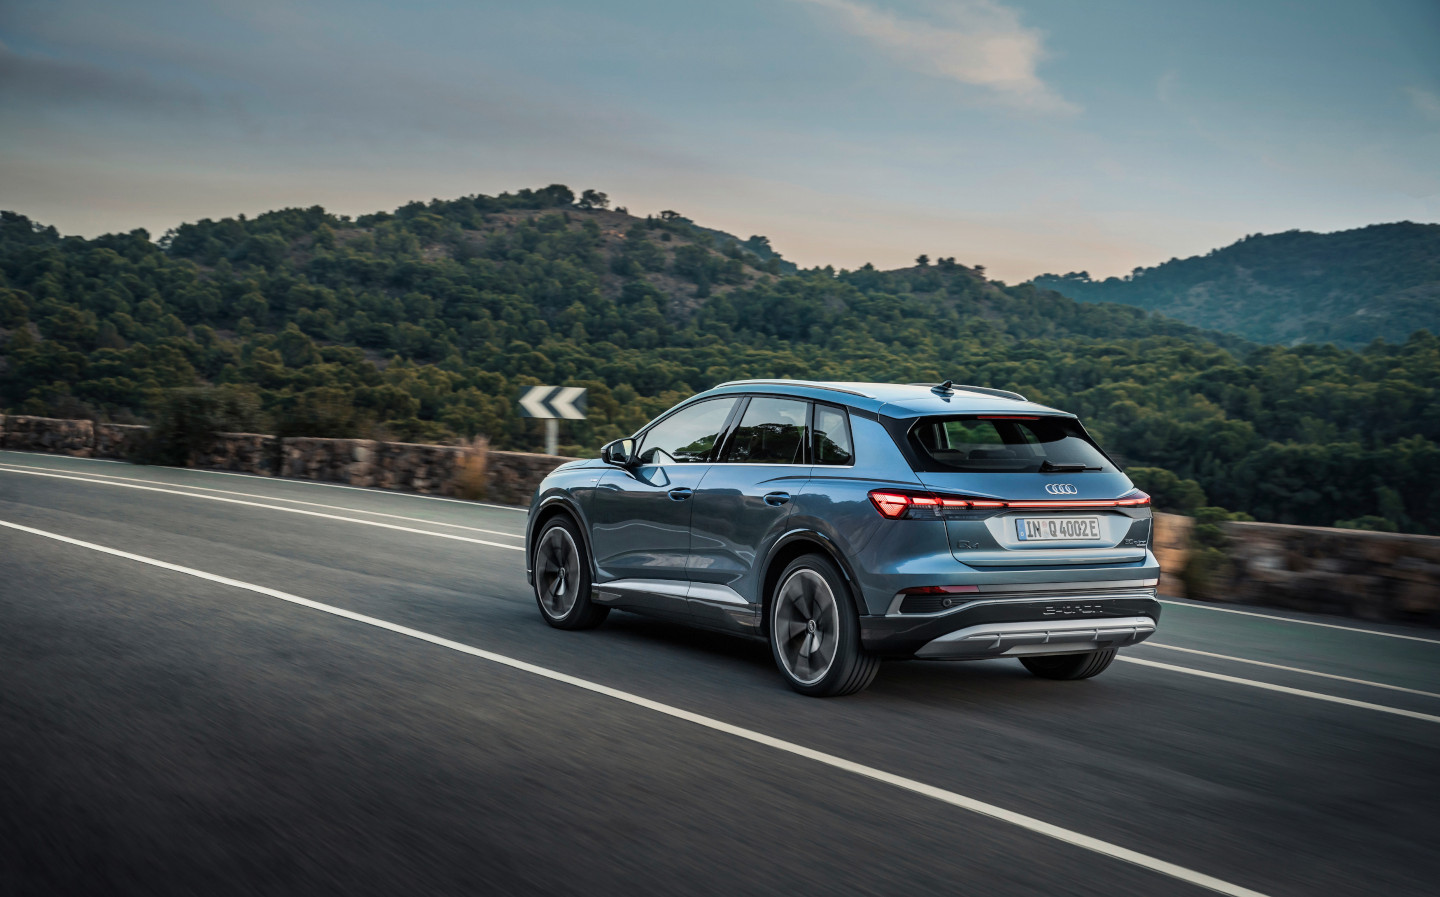 Audi's entry-level electric car, the Q4 e-tron, fully revealed